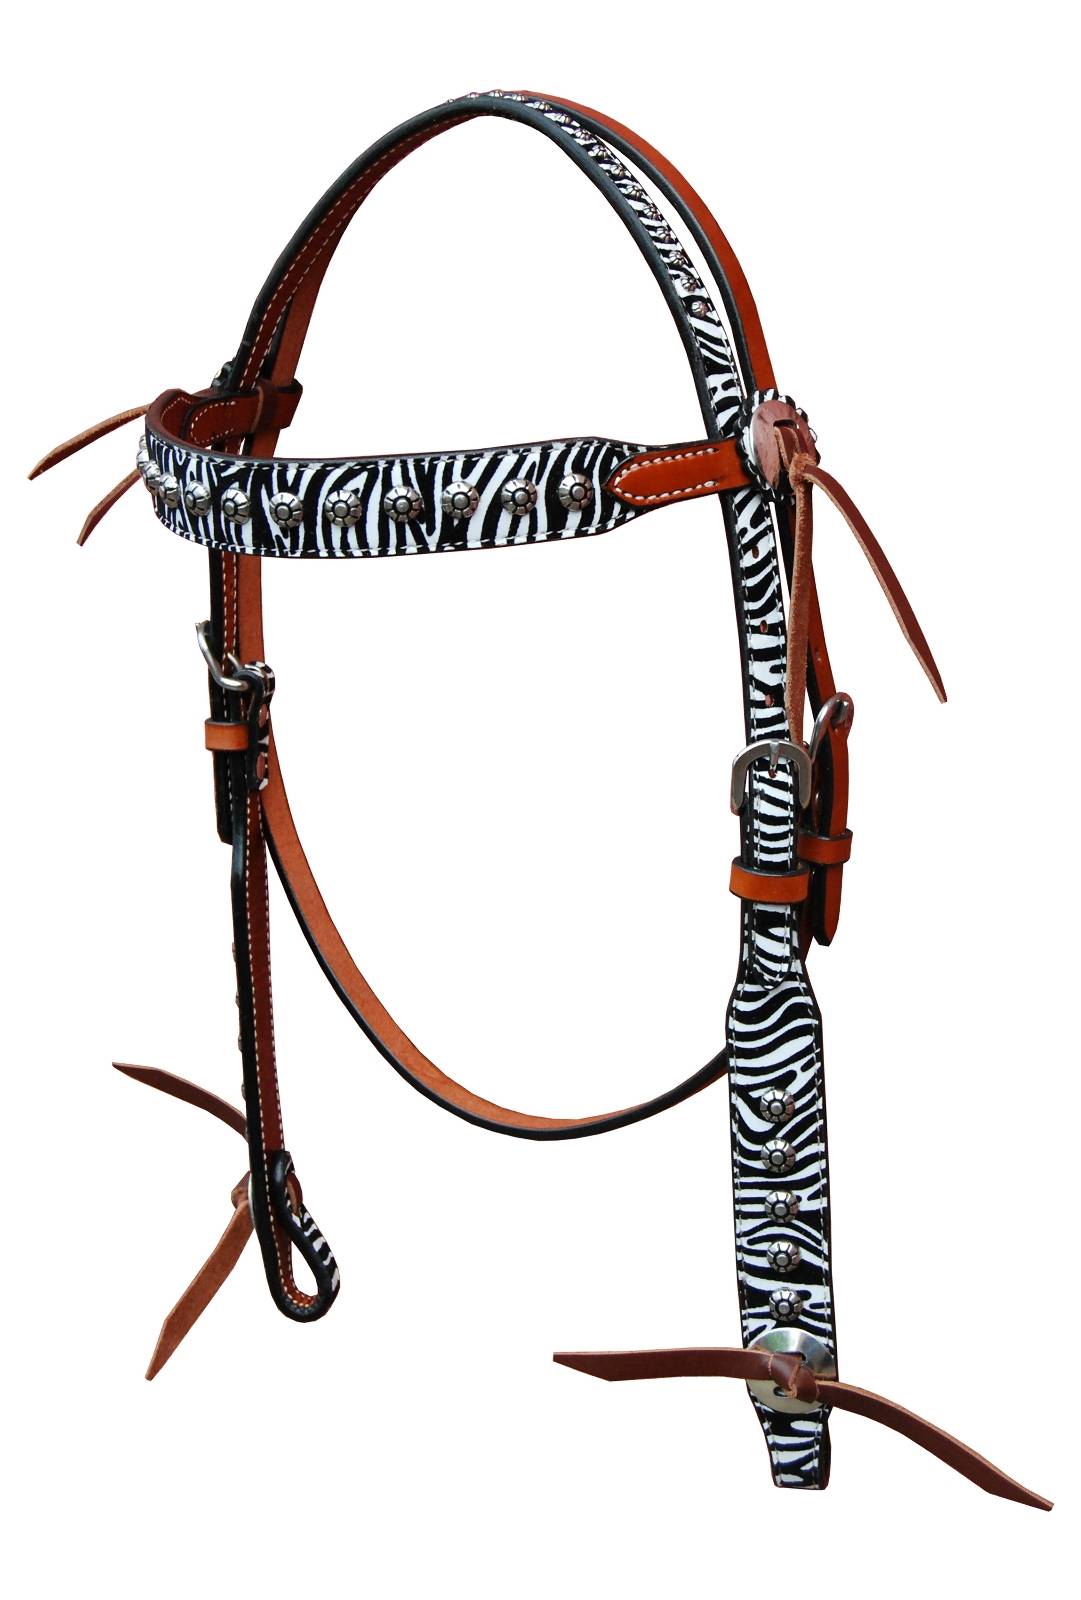 468856WHITEHRSE Turn-Two Browband Headstall - Chasing Wild sku 468856WHITEHRSE